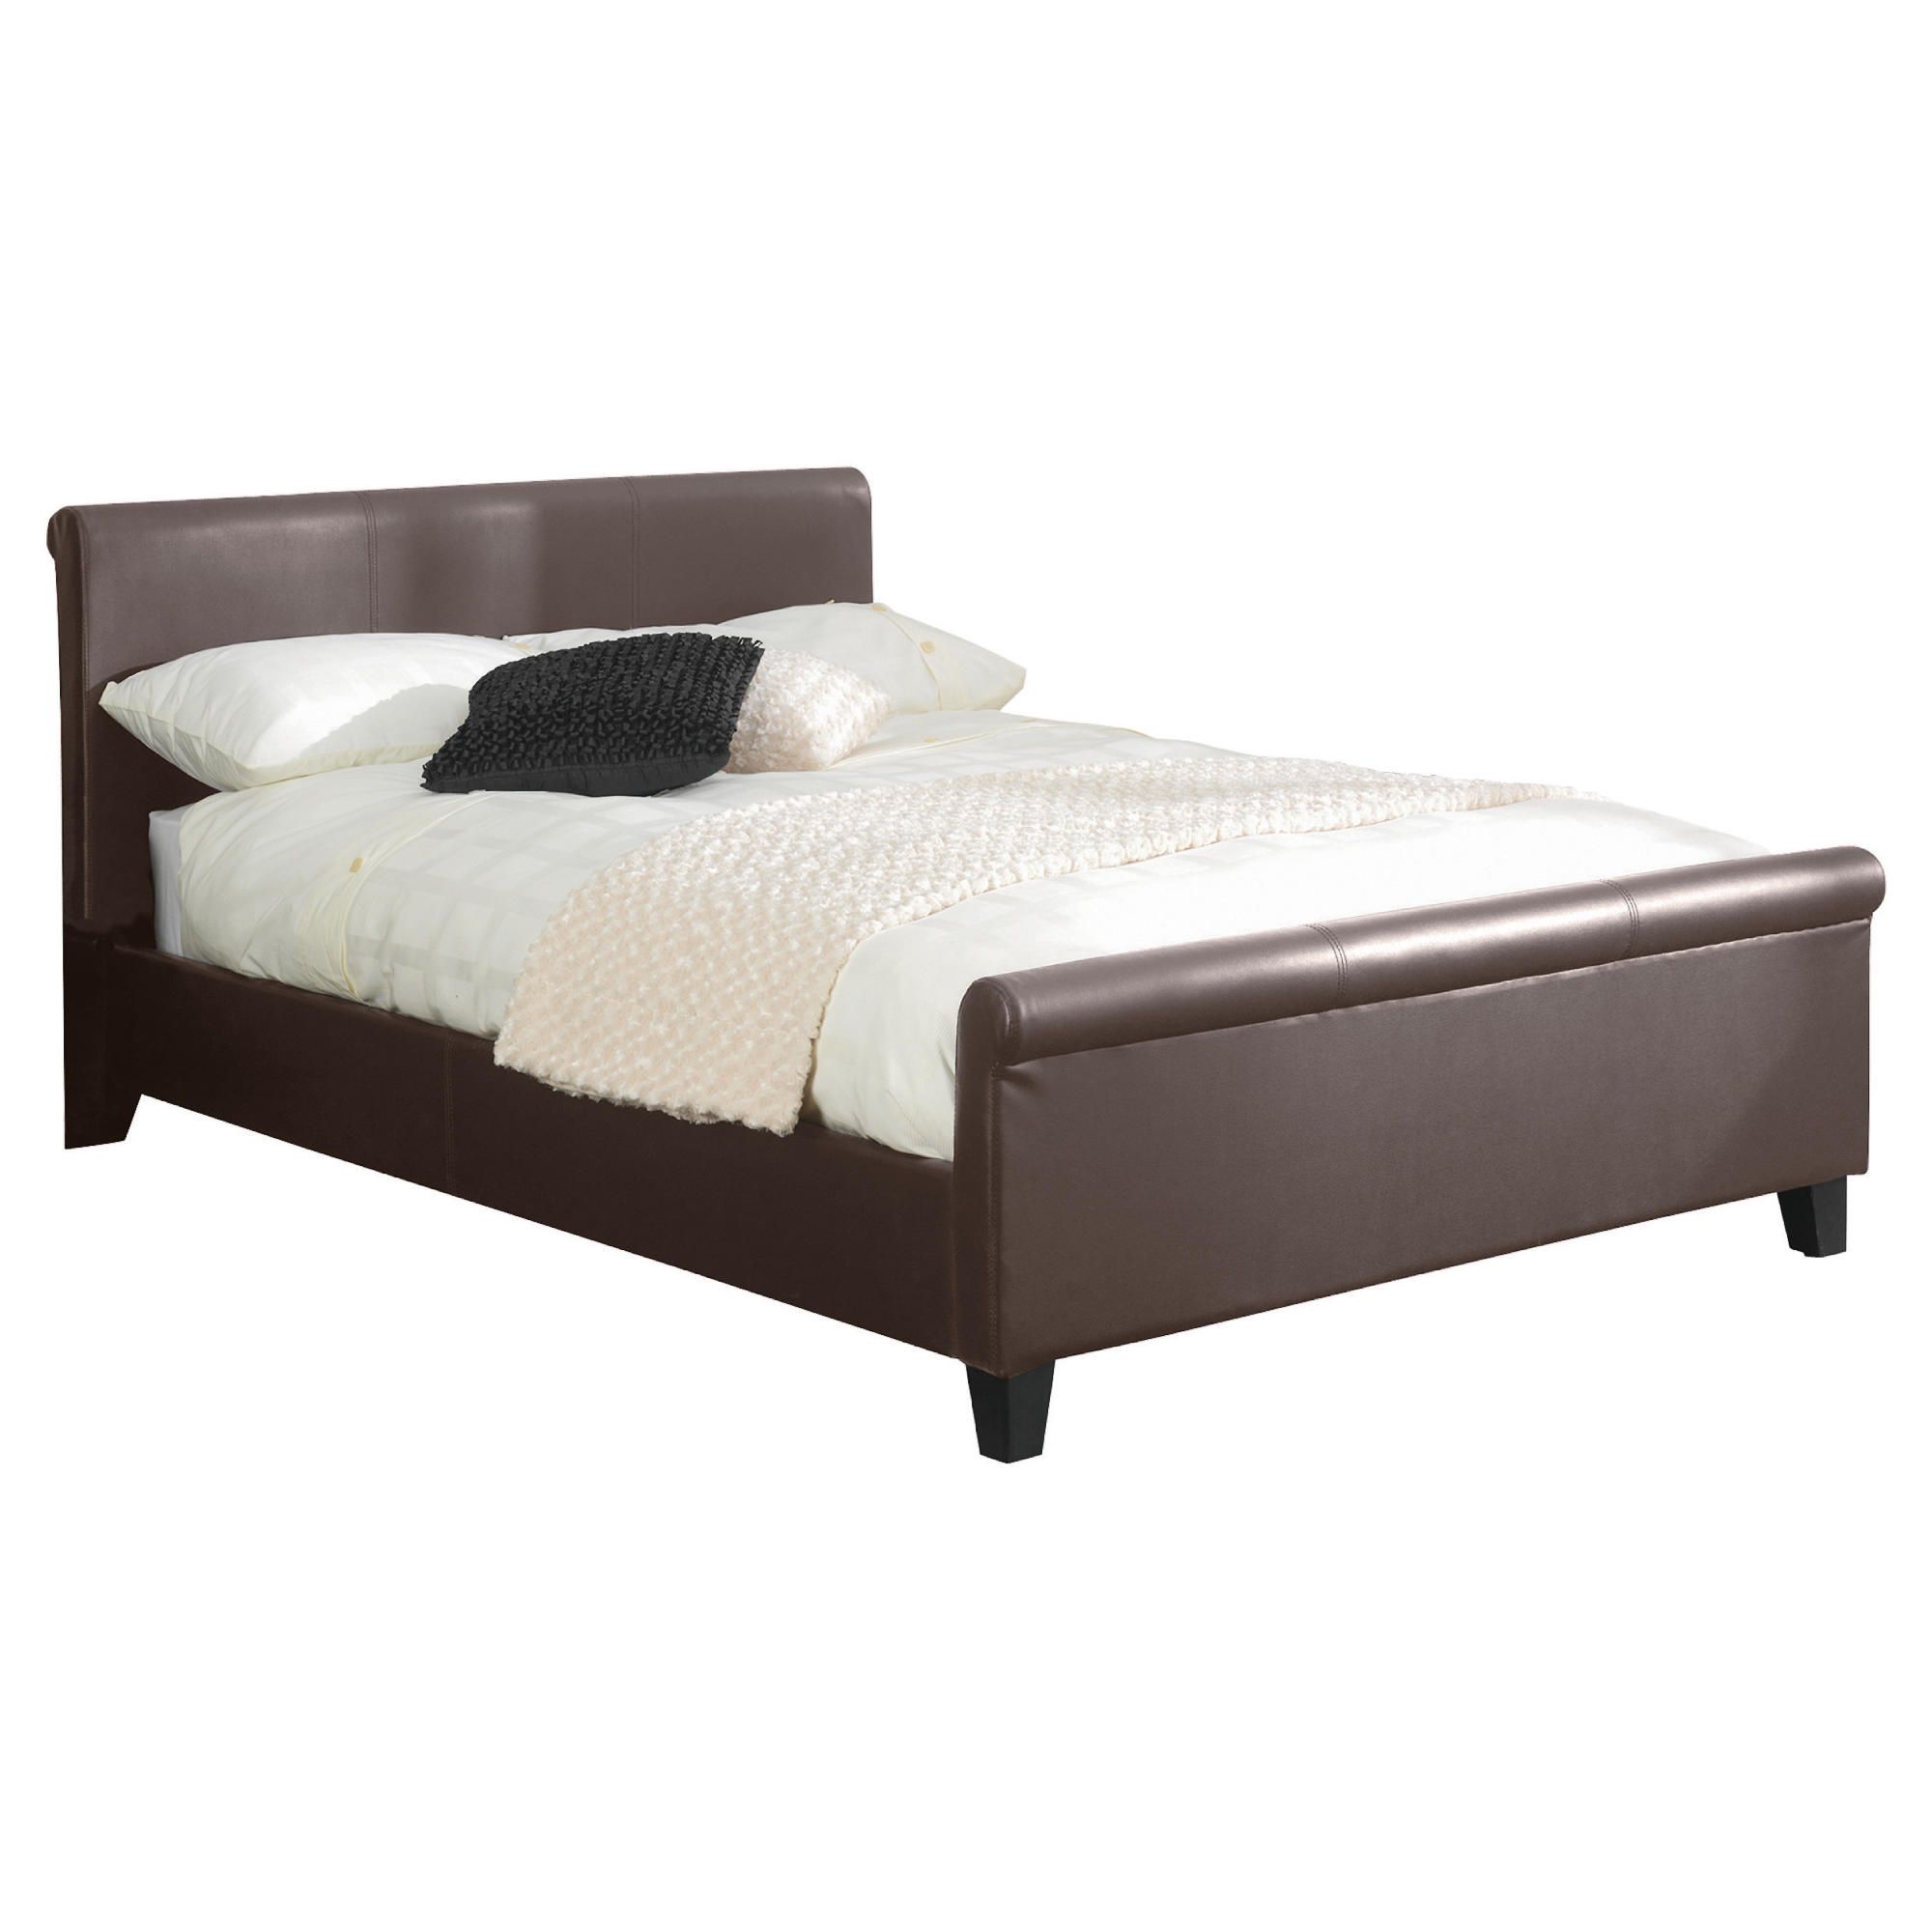 Cannes Classic Scroll King Bed Frame, Brown at Tescos Direct